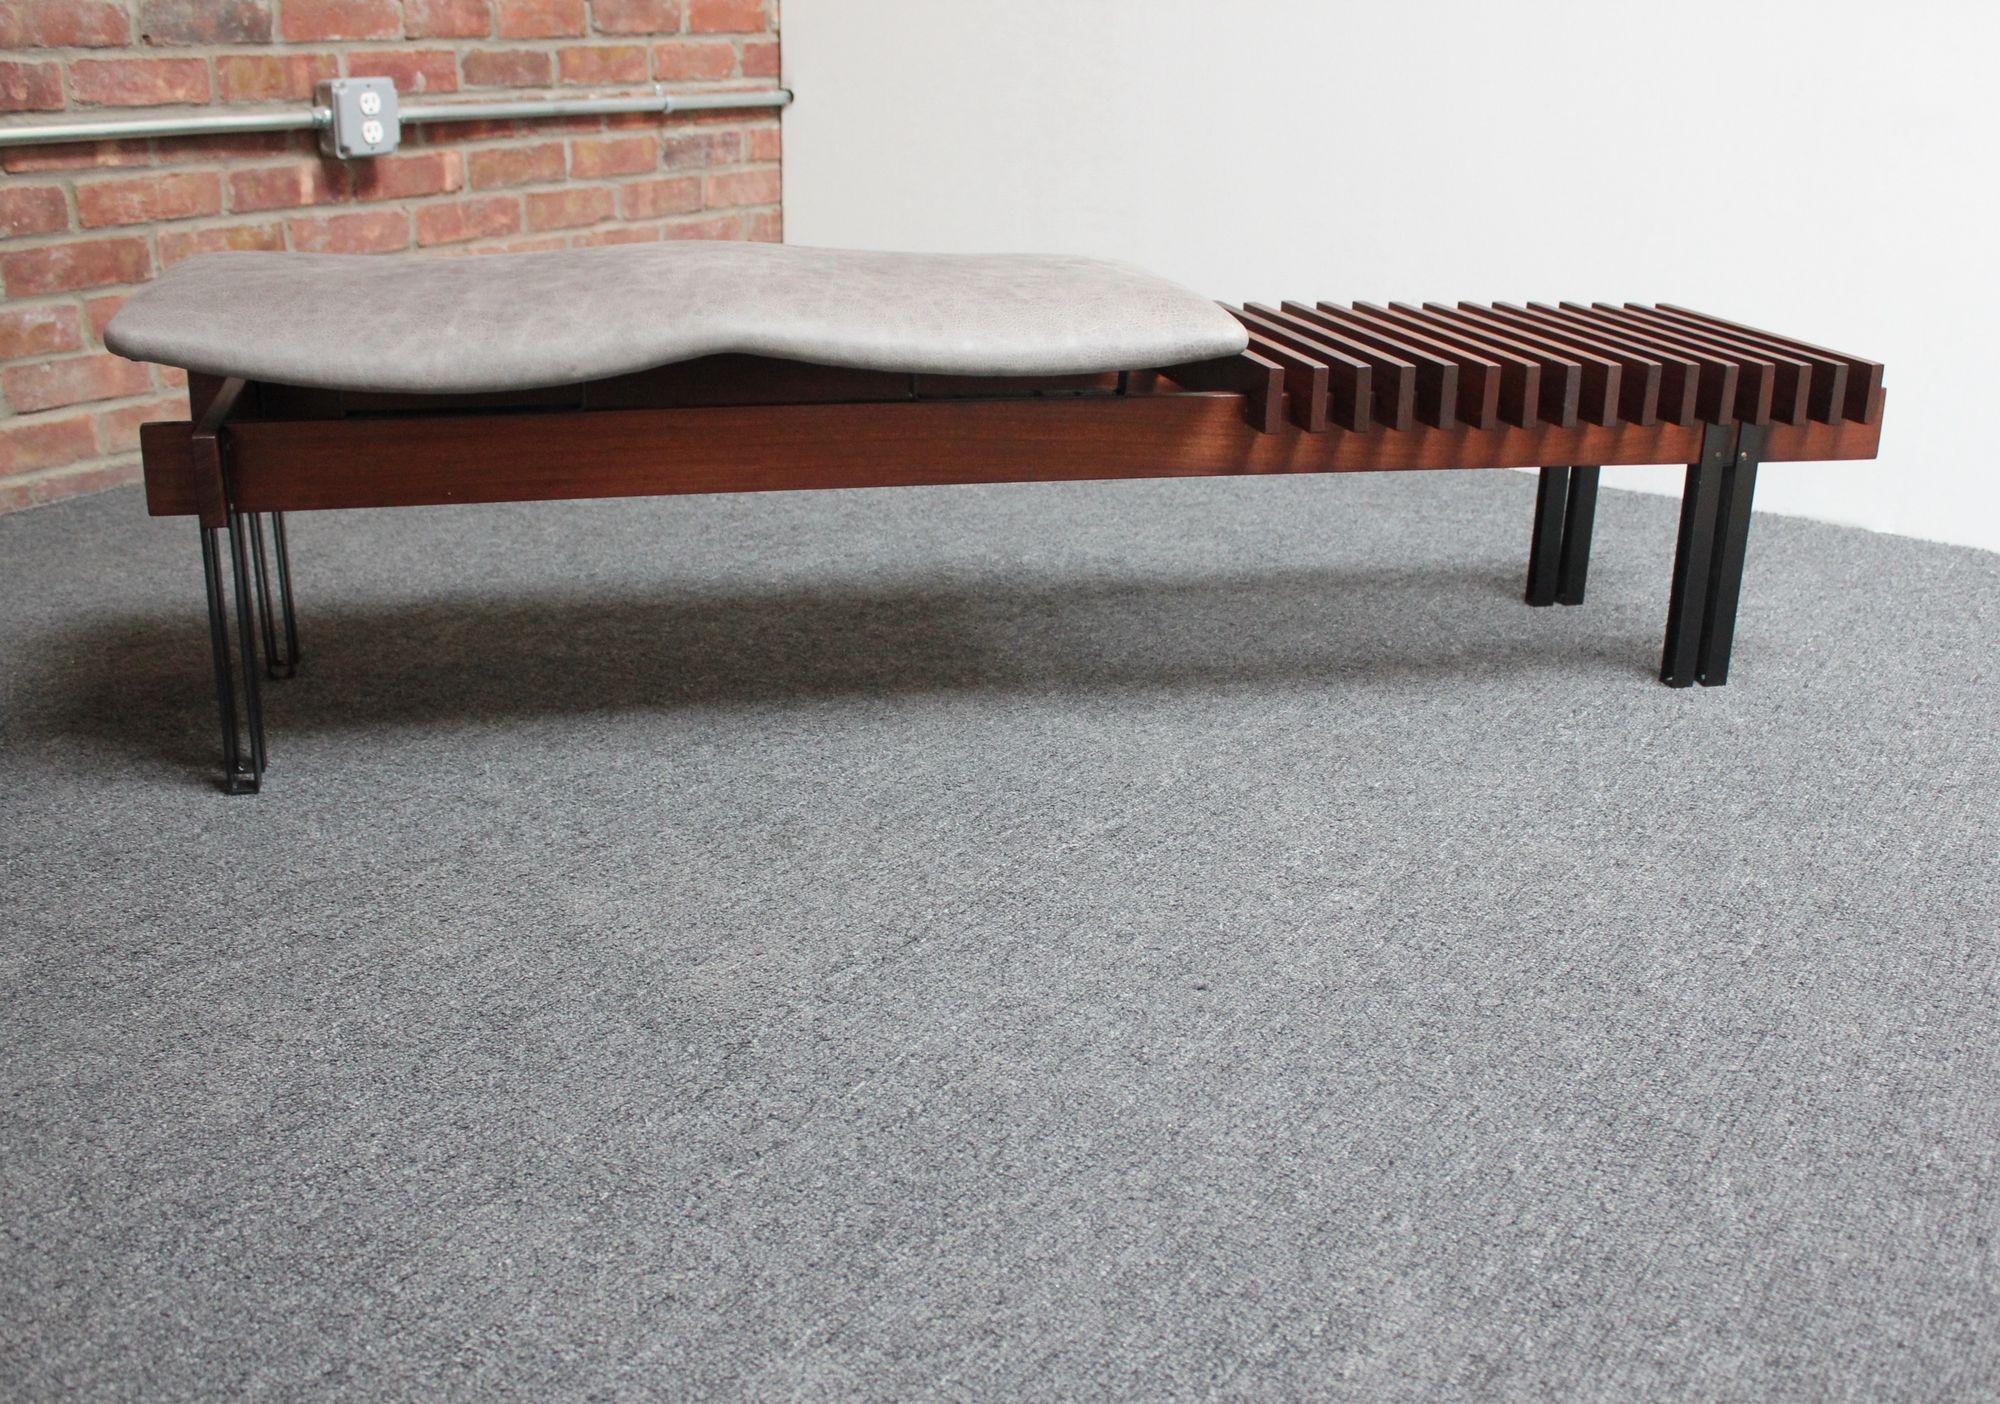 Italian Modernist Teak and Leather Bench by Inge and Luciano Rubino For Sale 11